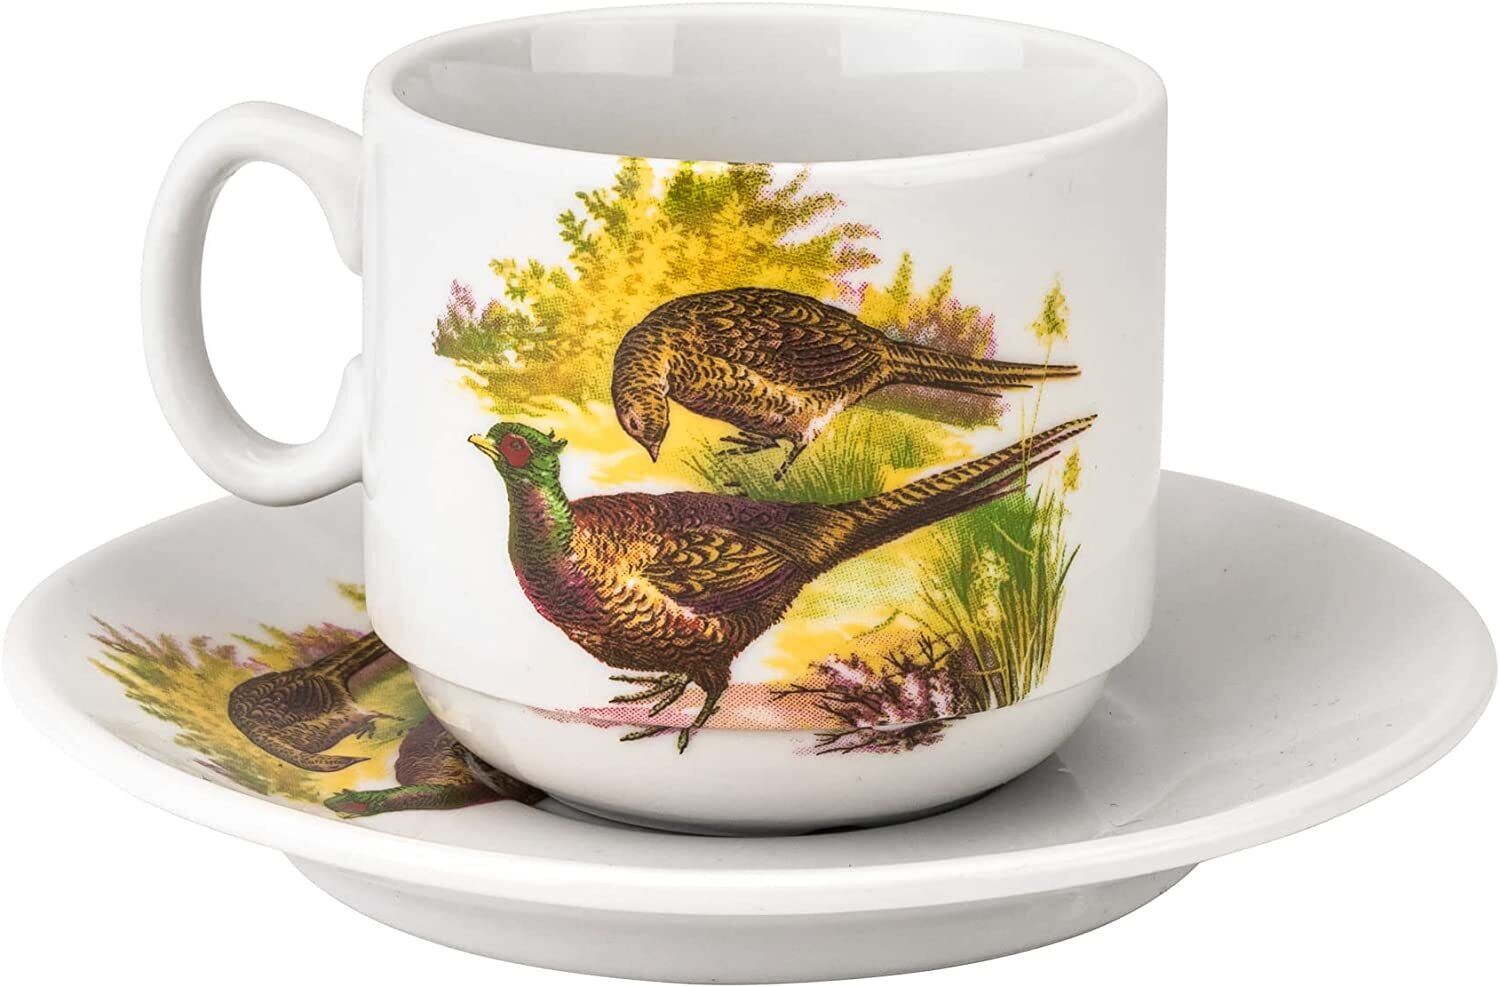 Dobrush DB6-1627-03 European Collection 3 oz Espresso Cup with Saucer. Pheasants